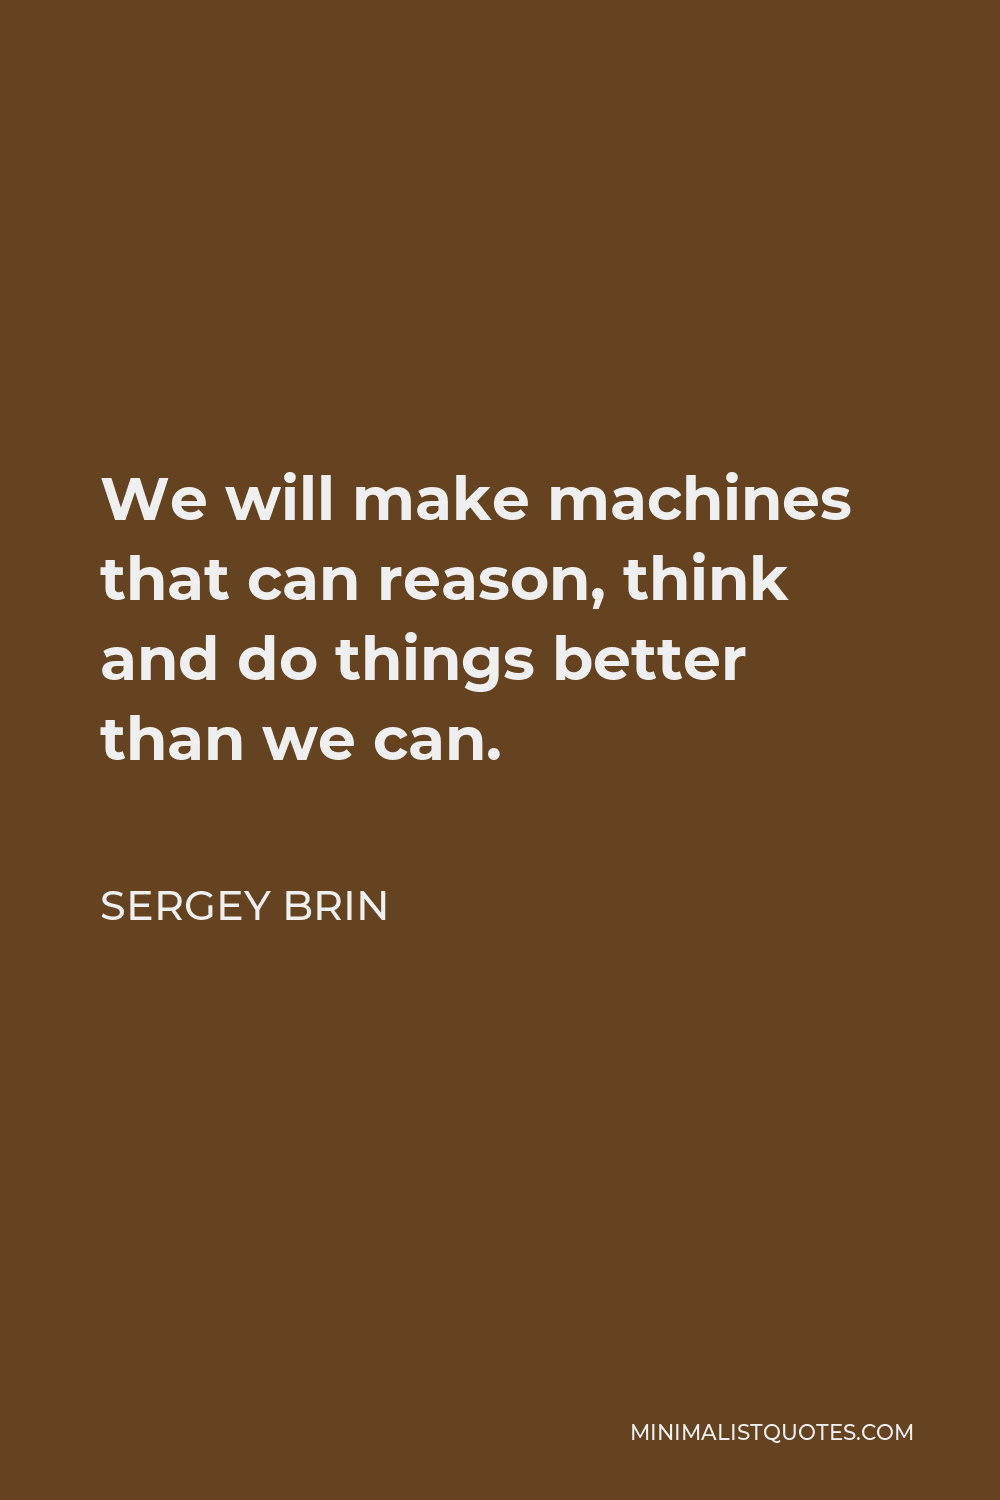 Larry Page Quote - We will make machines that can reason, think and do things better than we can.